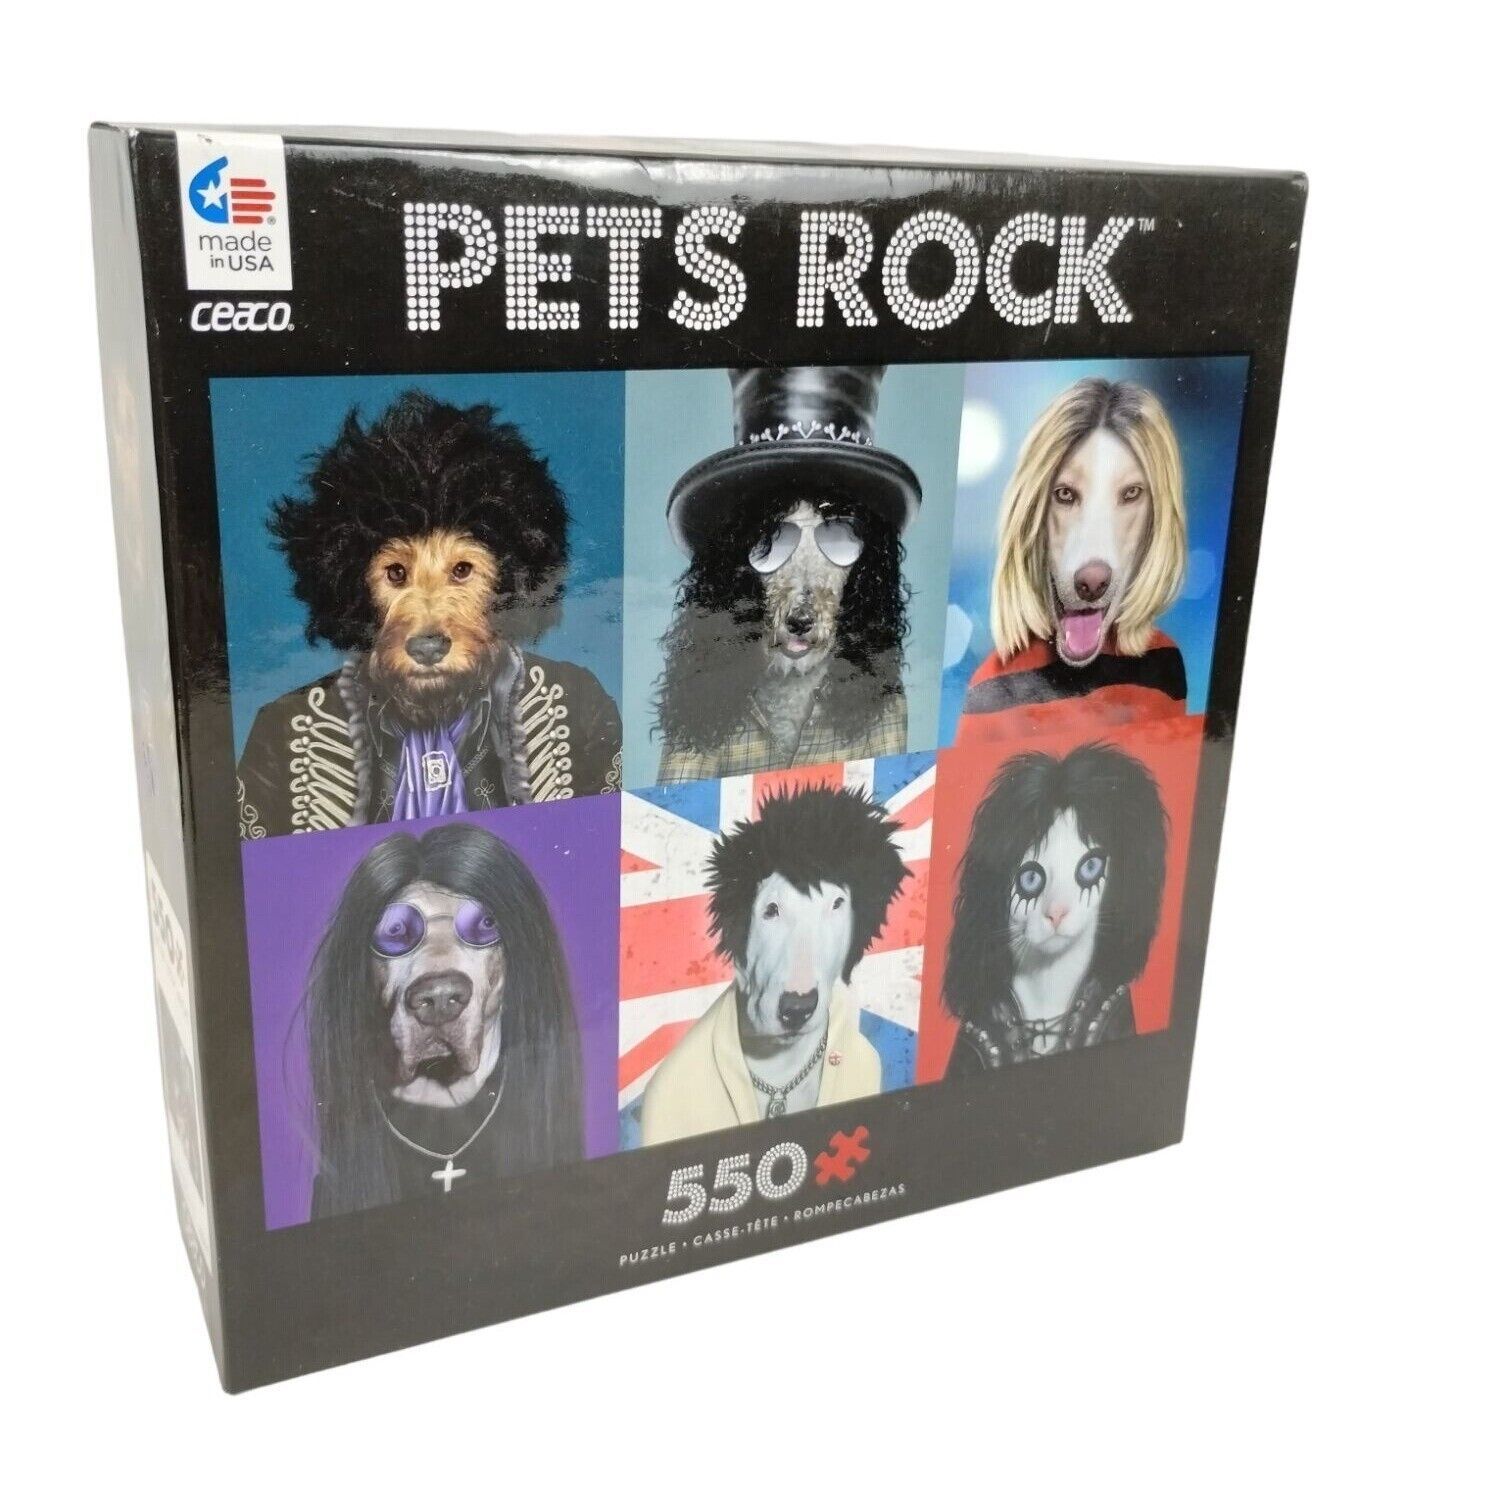 Primary image for Ceaco Pets Rock Famous Alternative and Metal Musicians 550 Piece Jigsaw Puzzle